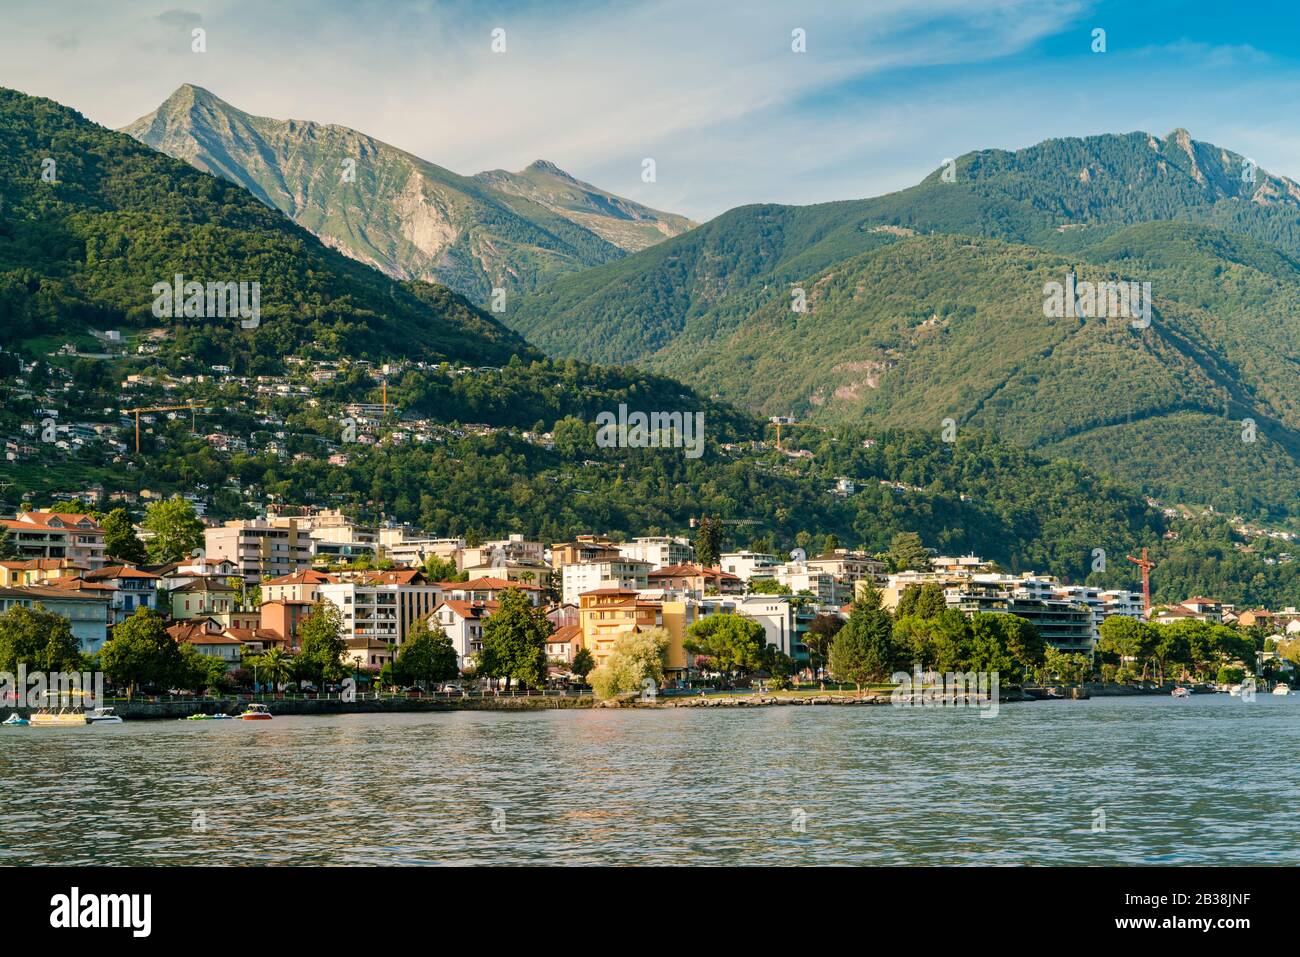 View of city of Locarno in summer with Alps mountains Stock Photo